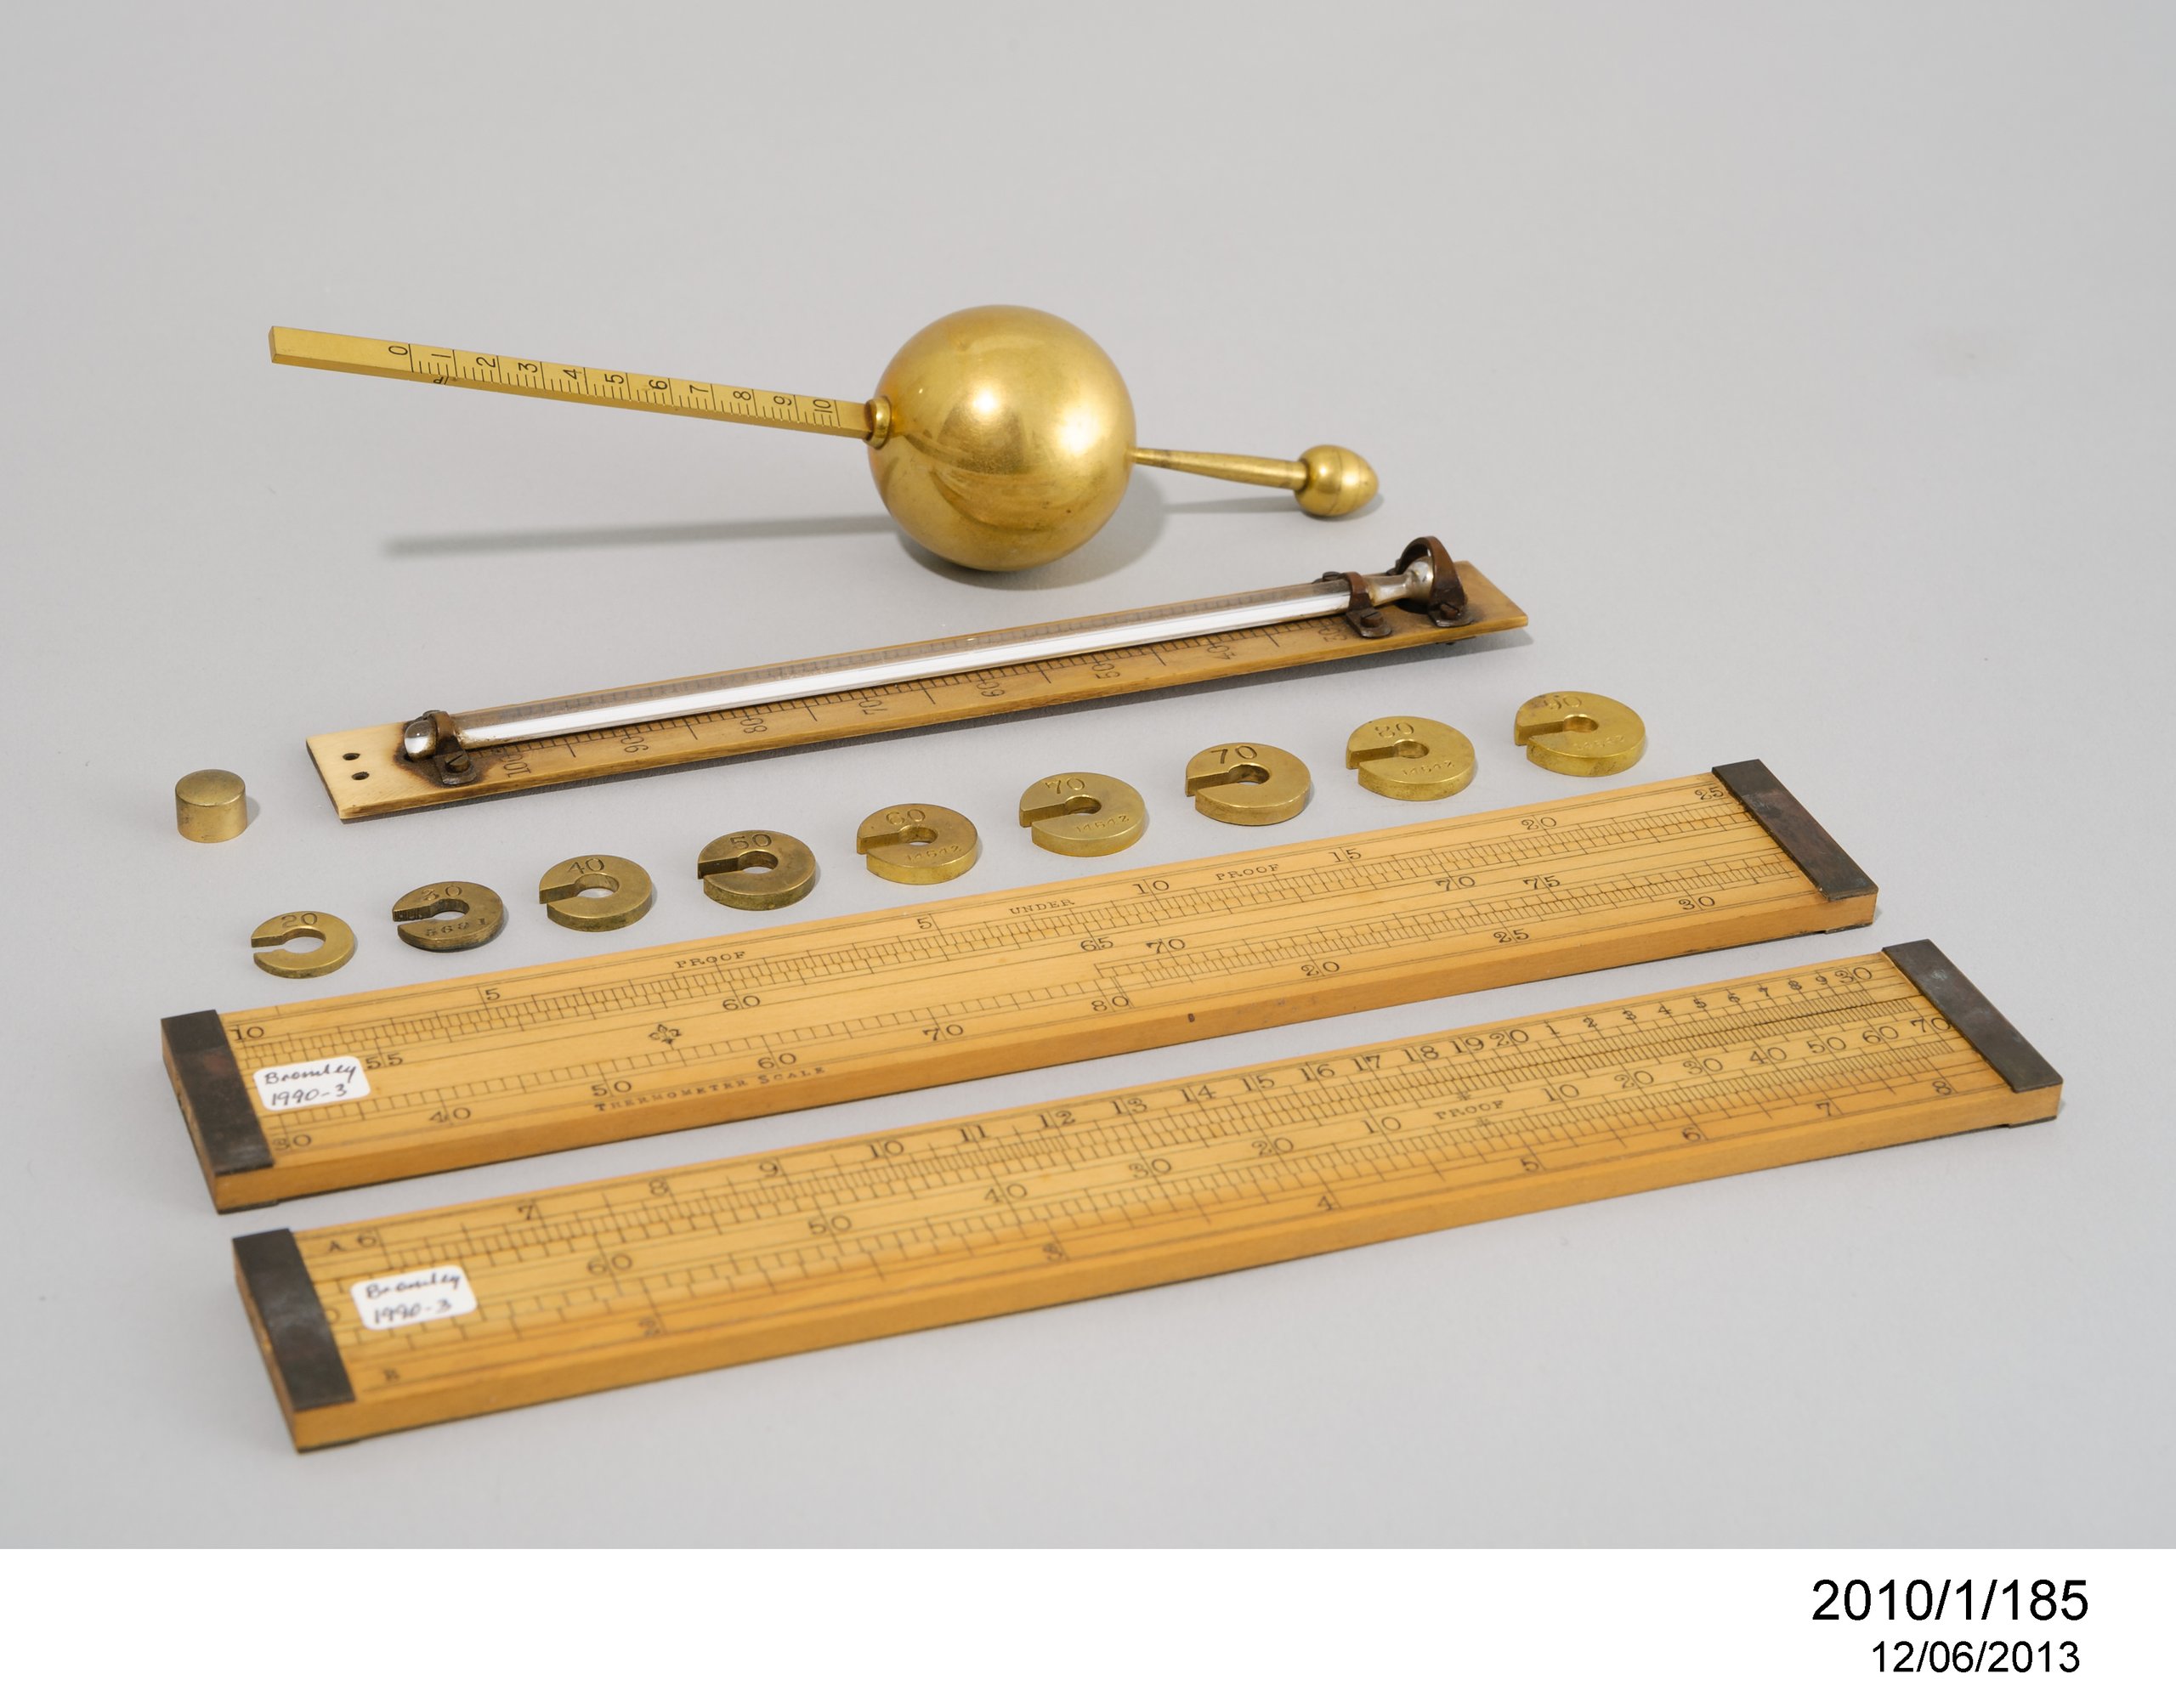 Sikes hydrometer for measuring density of liquids